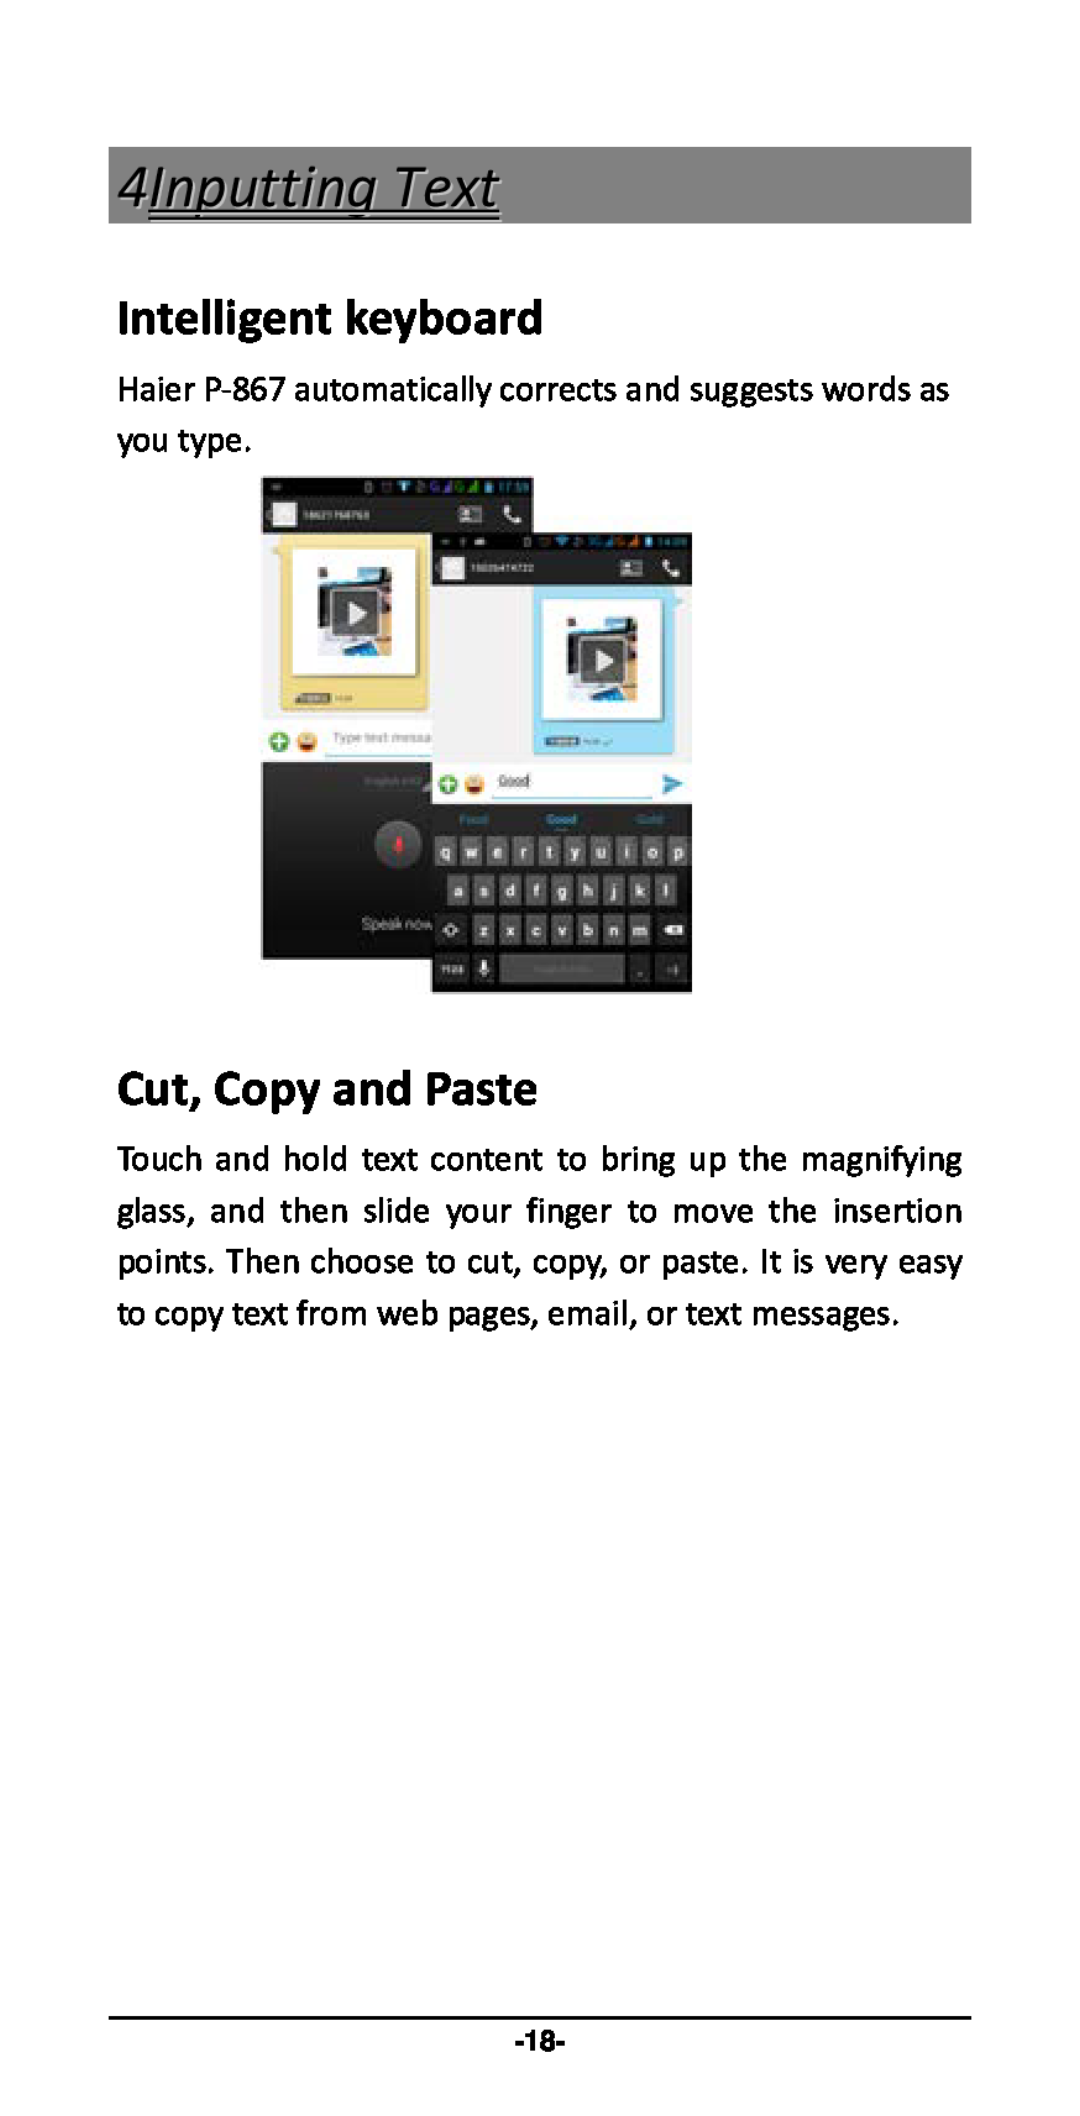 Haier P-867 user manual 4Inputting Text, Intelligent keyboard, Cut, Copy and Paste 